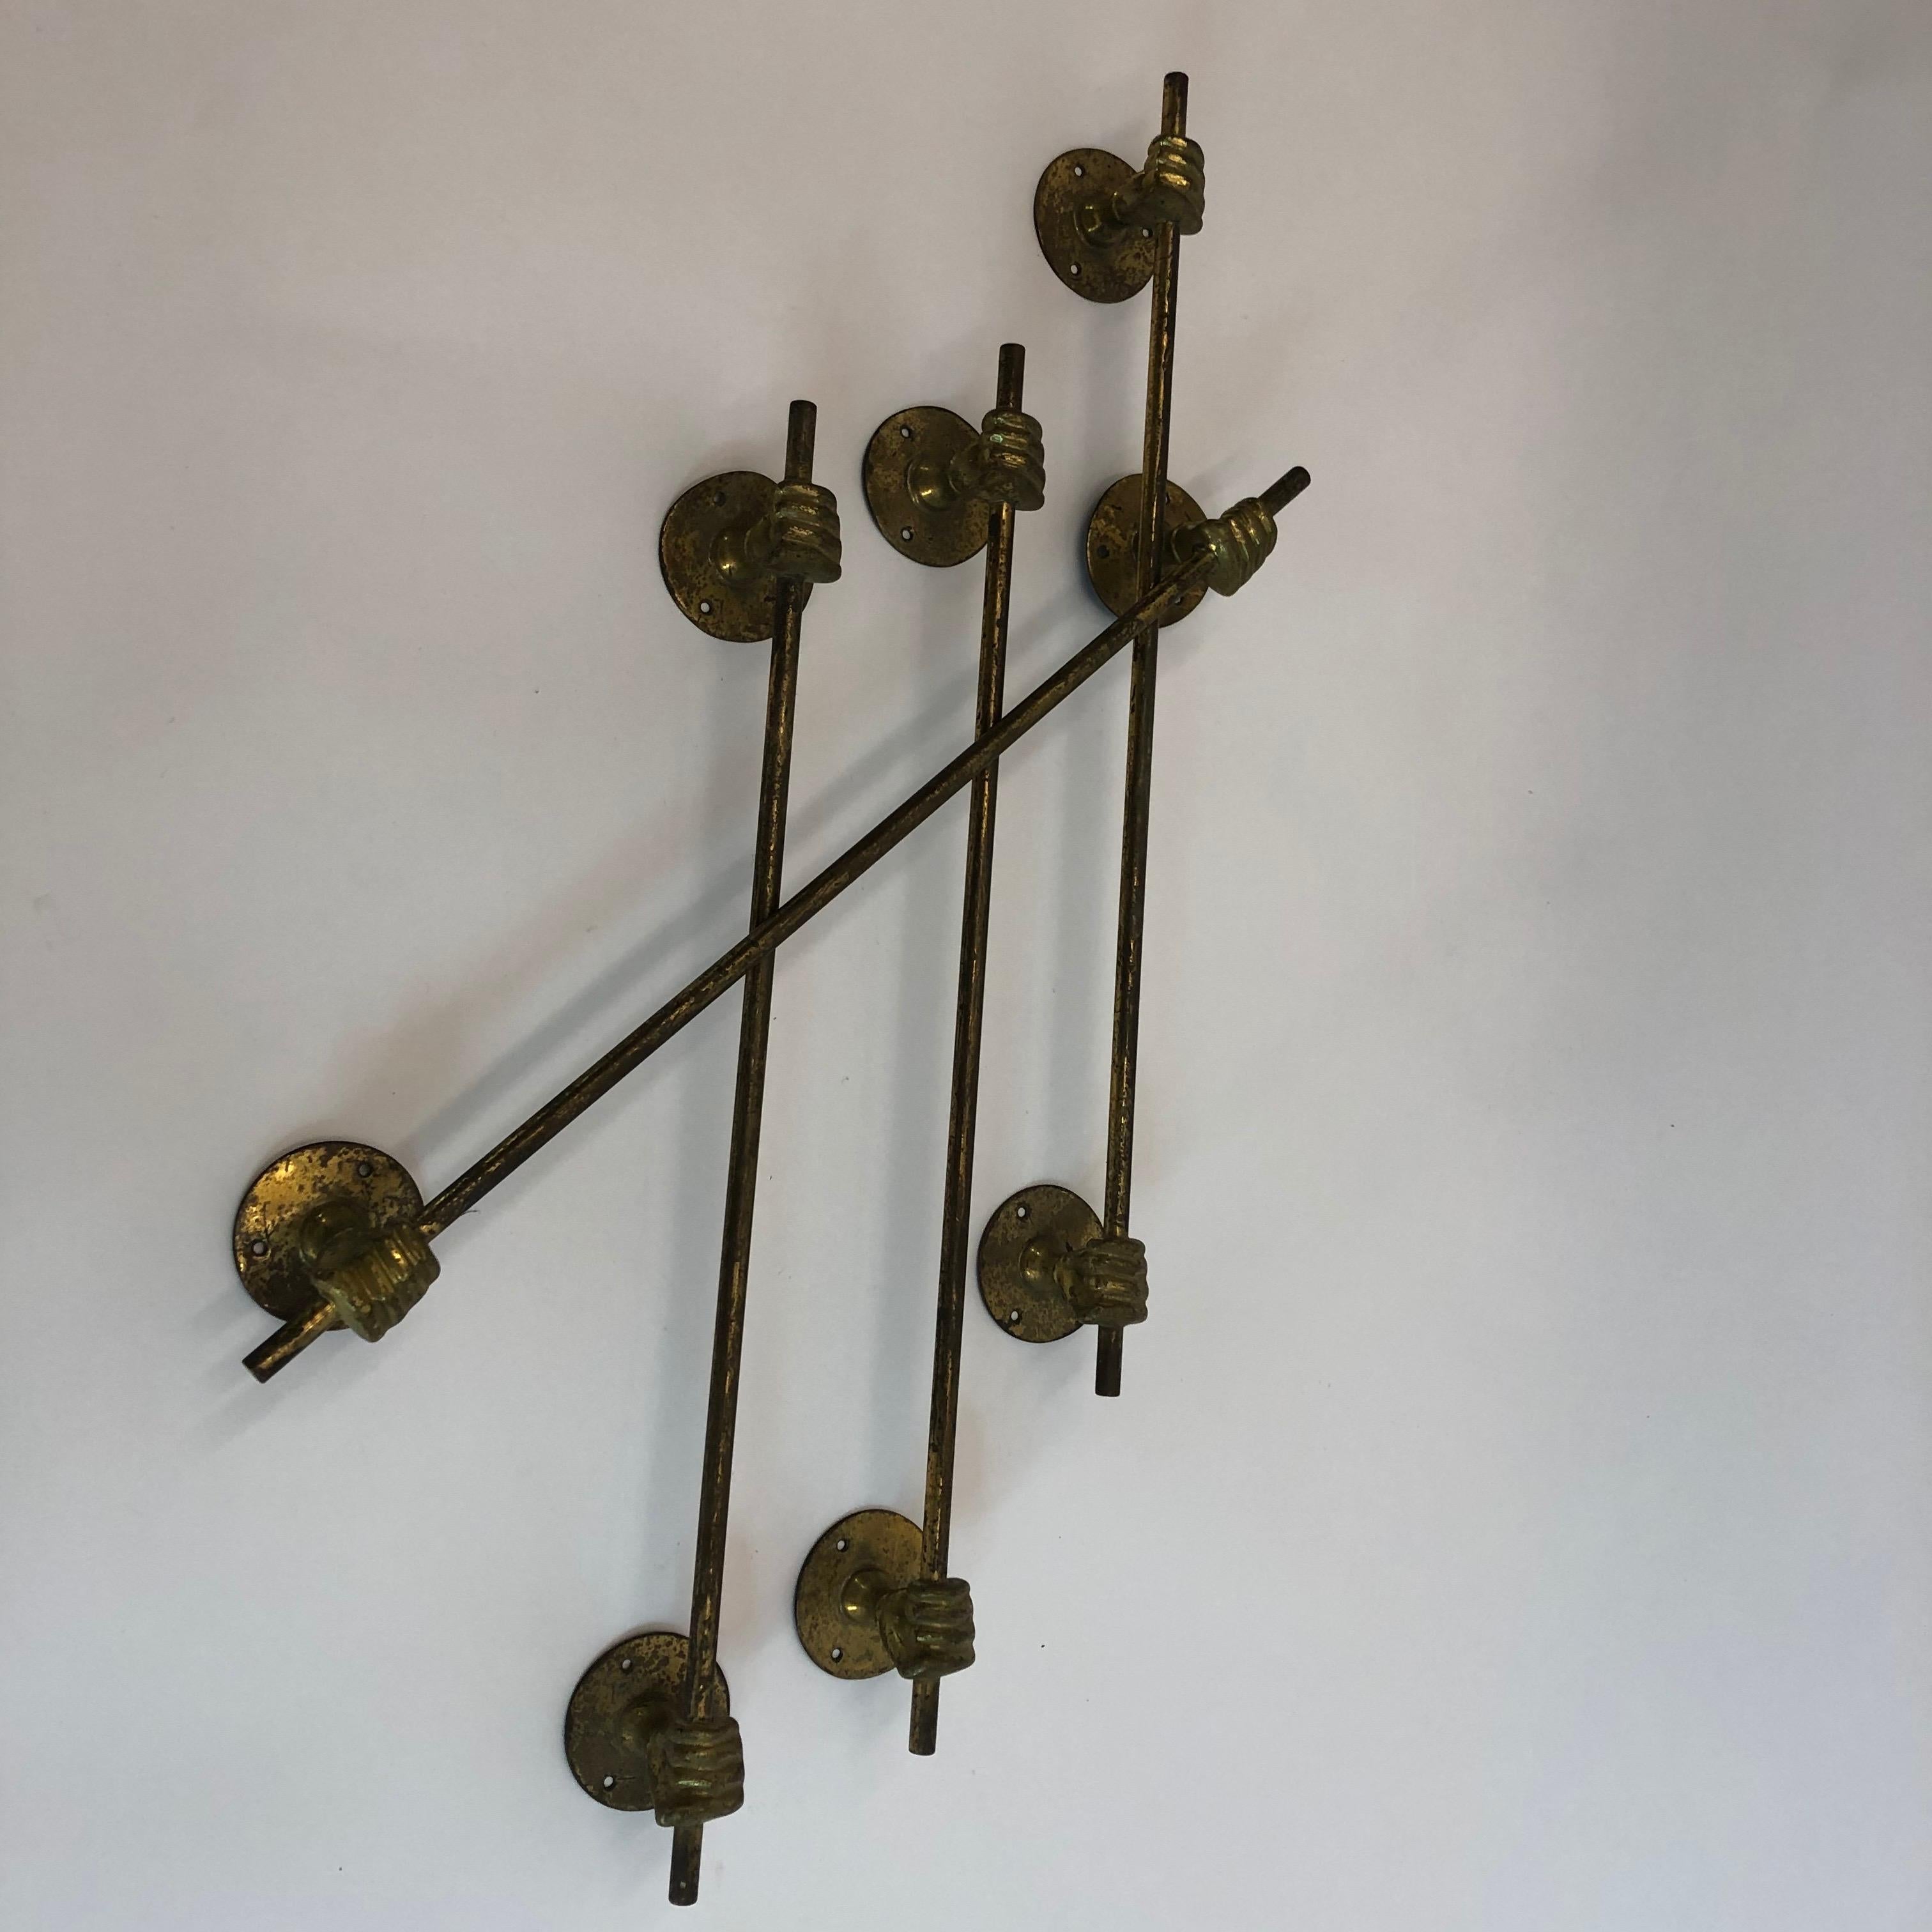 French Vintage Metal/Brass Hands/Fists Holding a Towel Rail